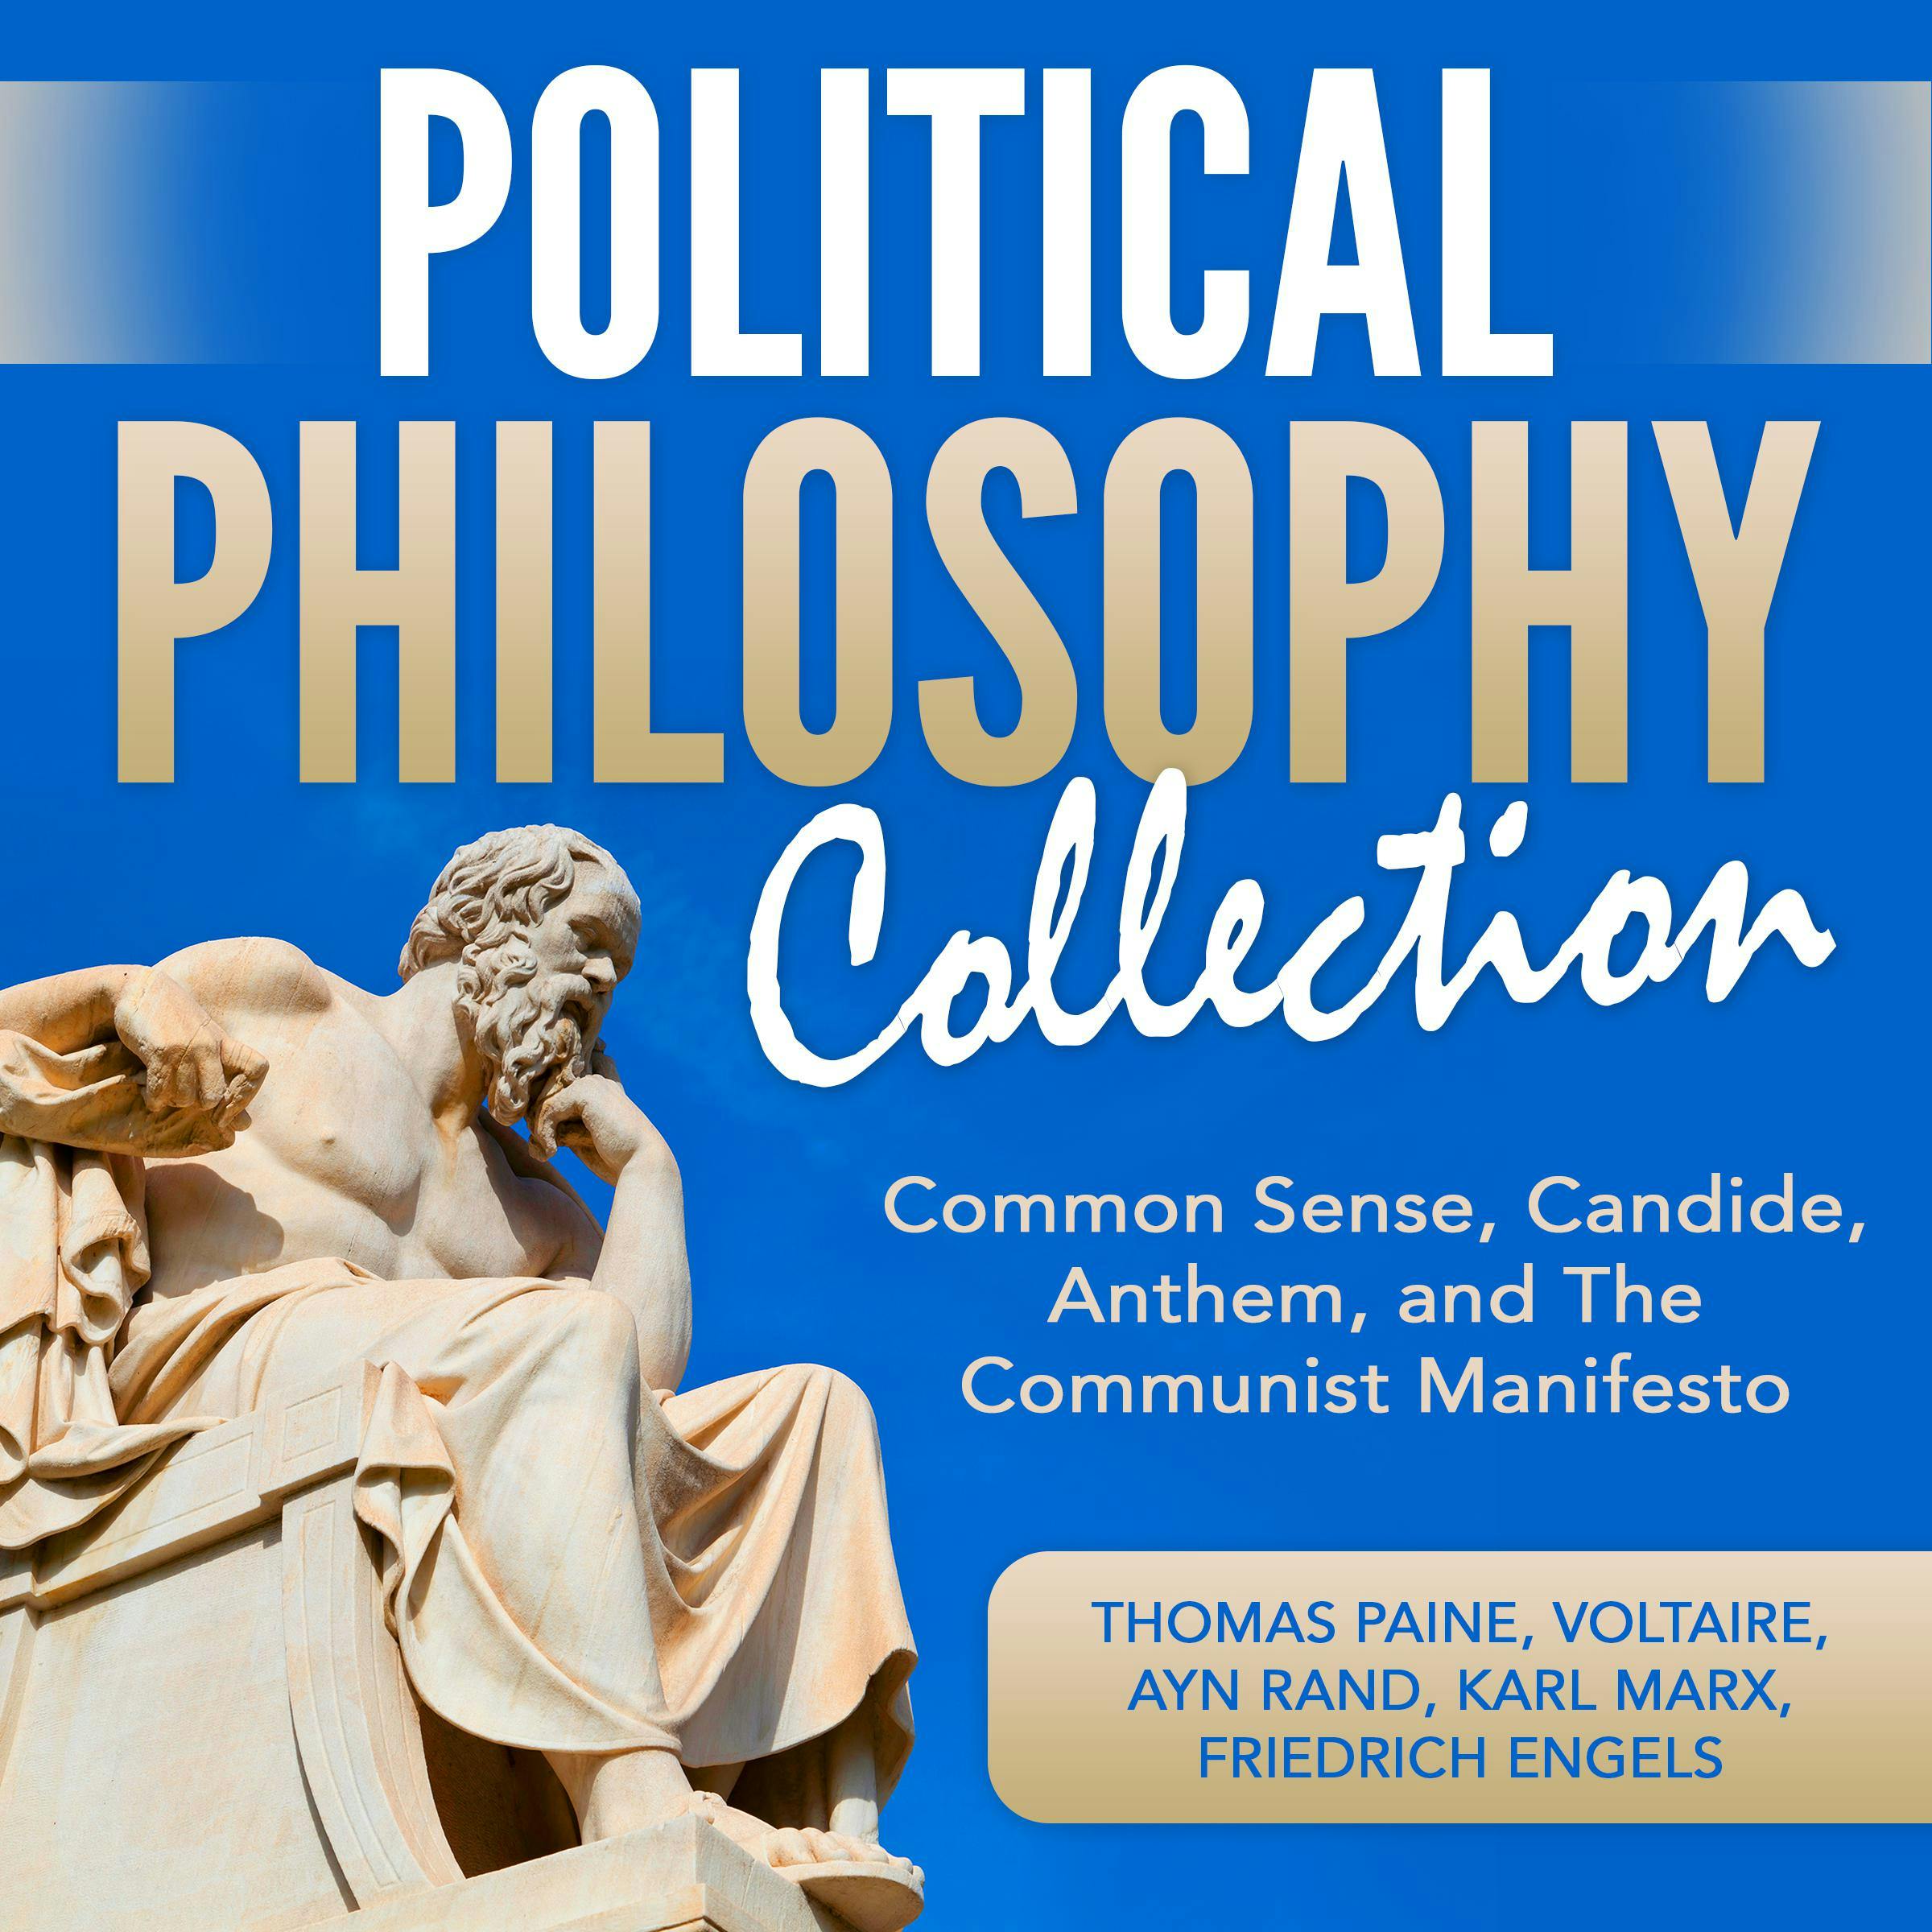 Political Philosophy Collection: Common Sense, Candide, Anthem, and The Communist Manifesto - Ayn Rand, Friedrich Engels, Voltaire, Karl Marx, Thomas Paine